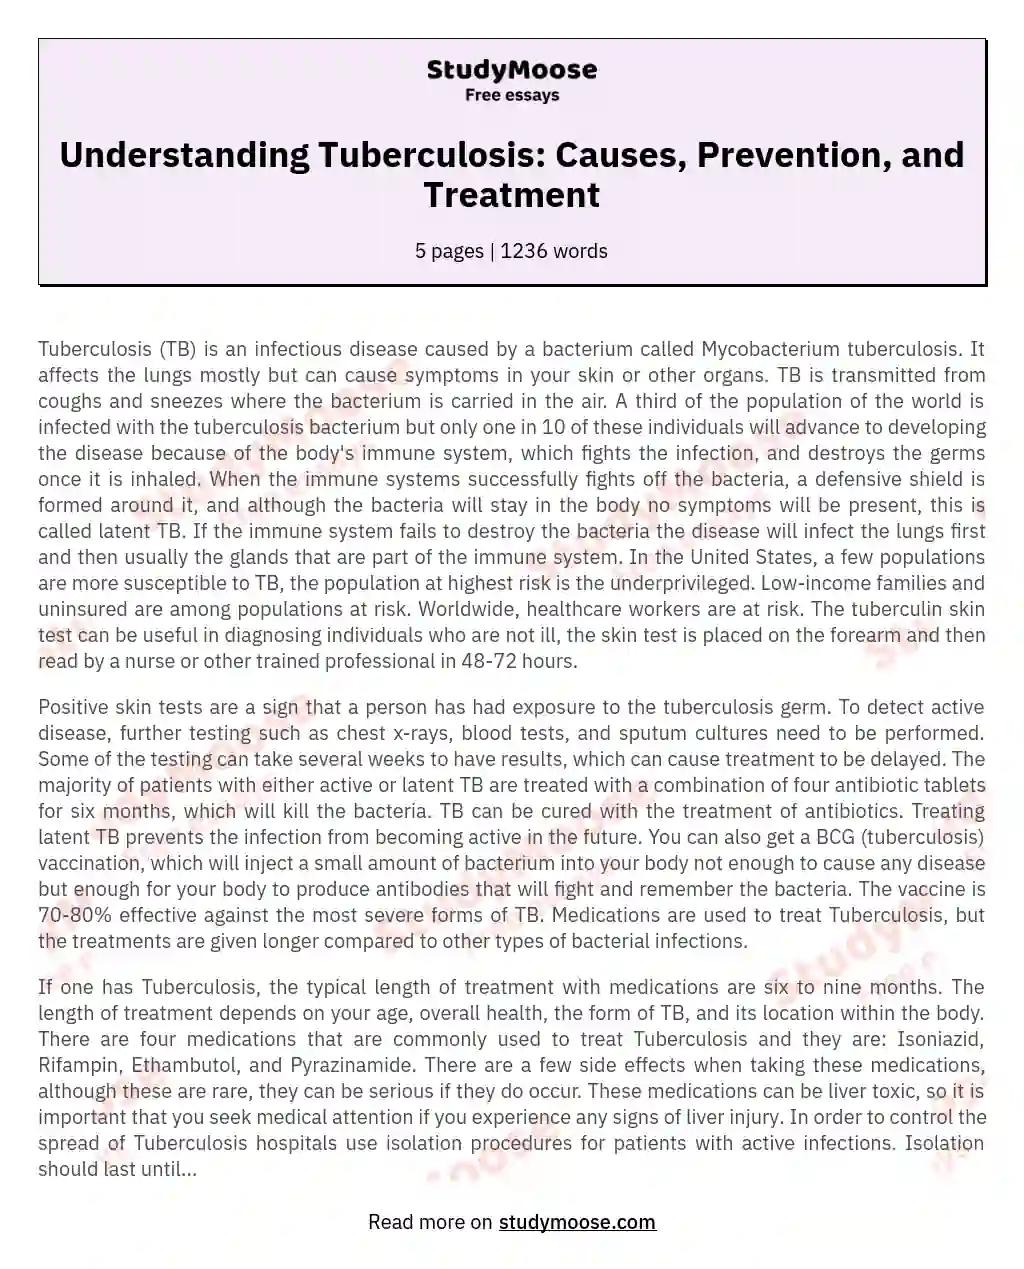 Understanding Tuberculosis: Causes, Prevention, and Treatment essay